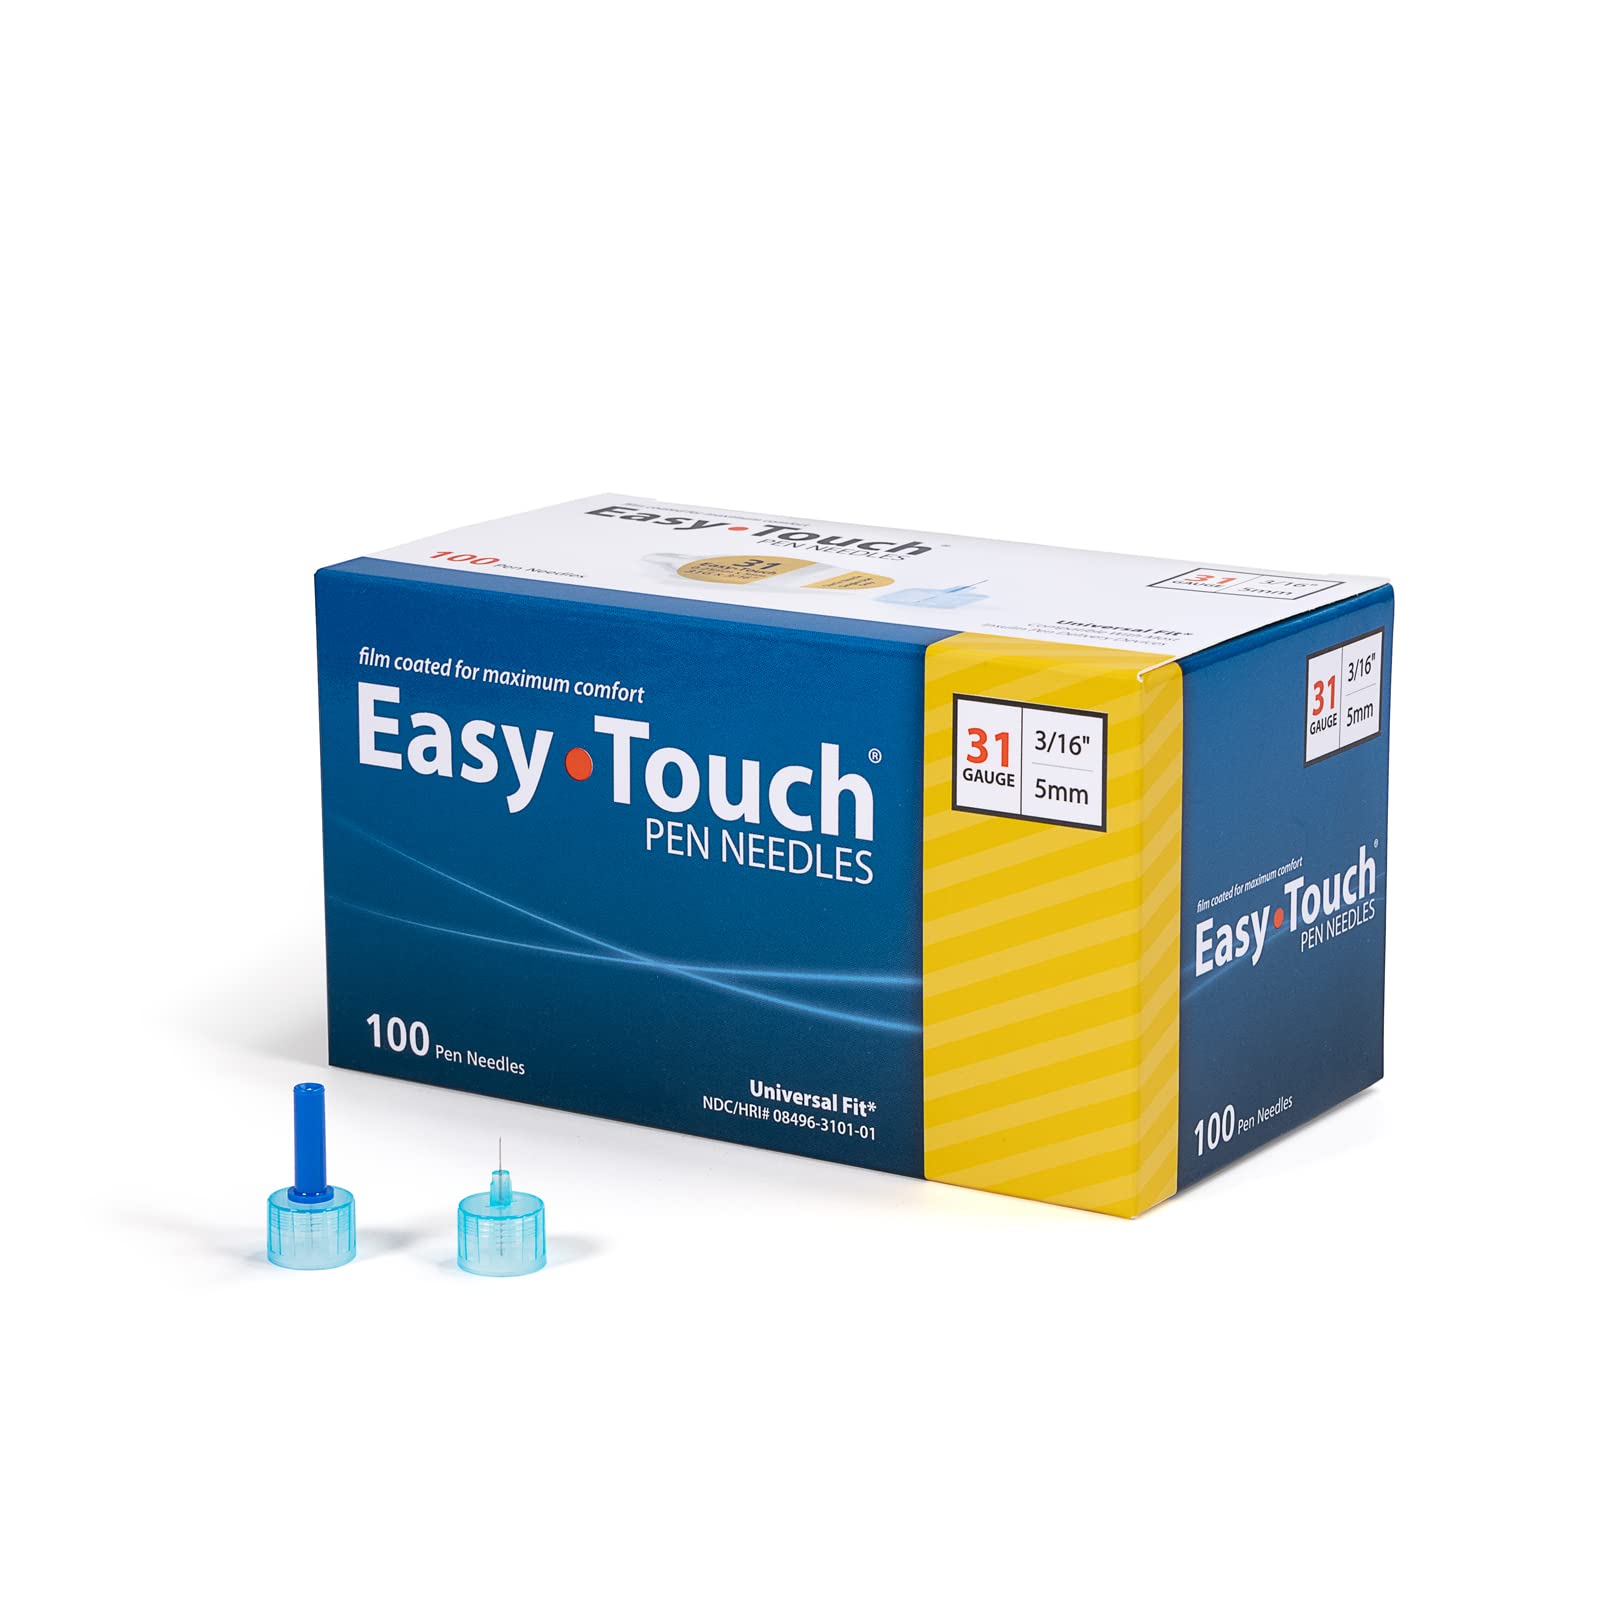 Easy Touch Insulin Pen Needles 31G, 3/16-Inch (5mm), Box of 100